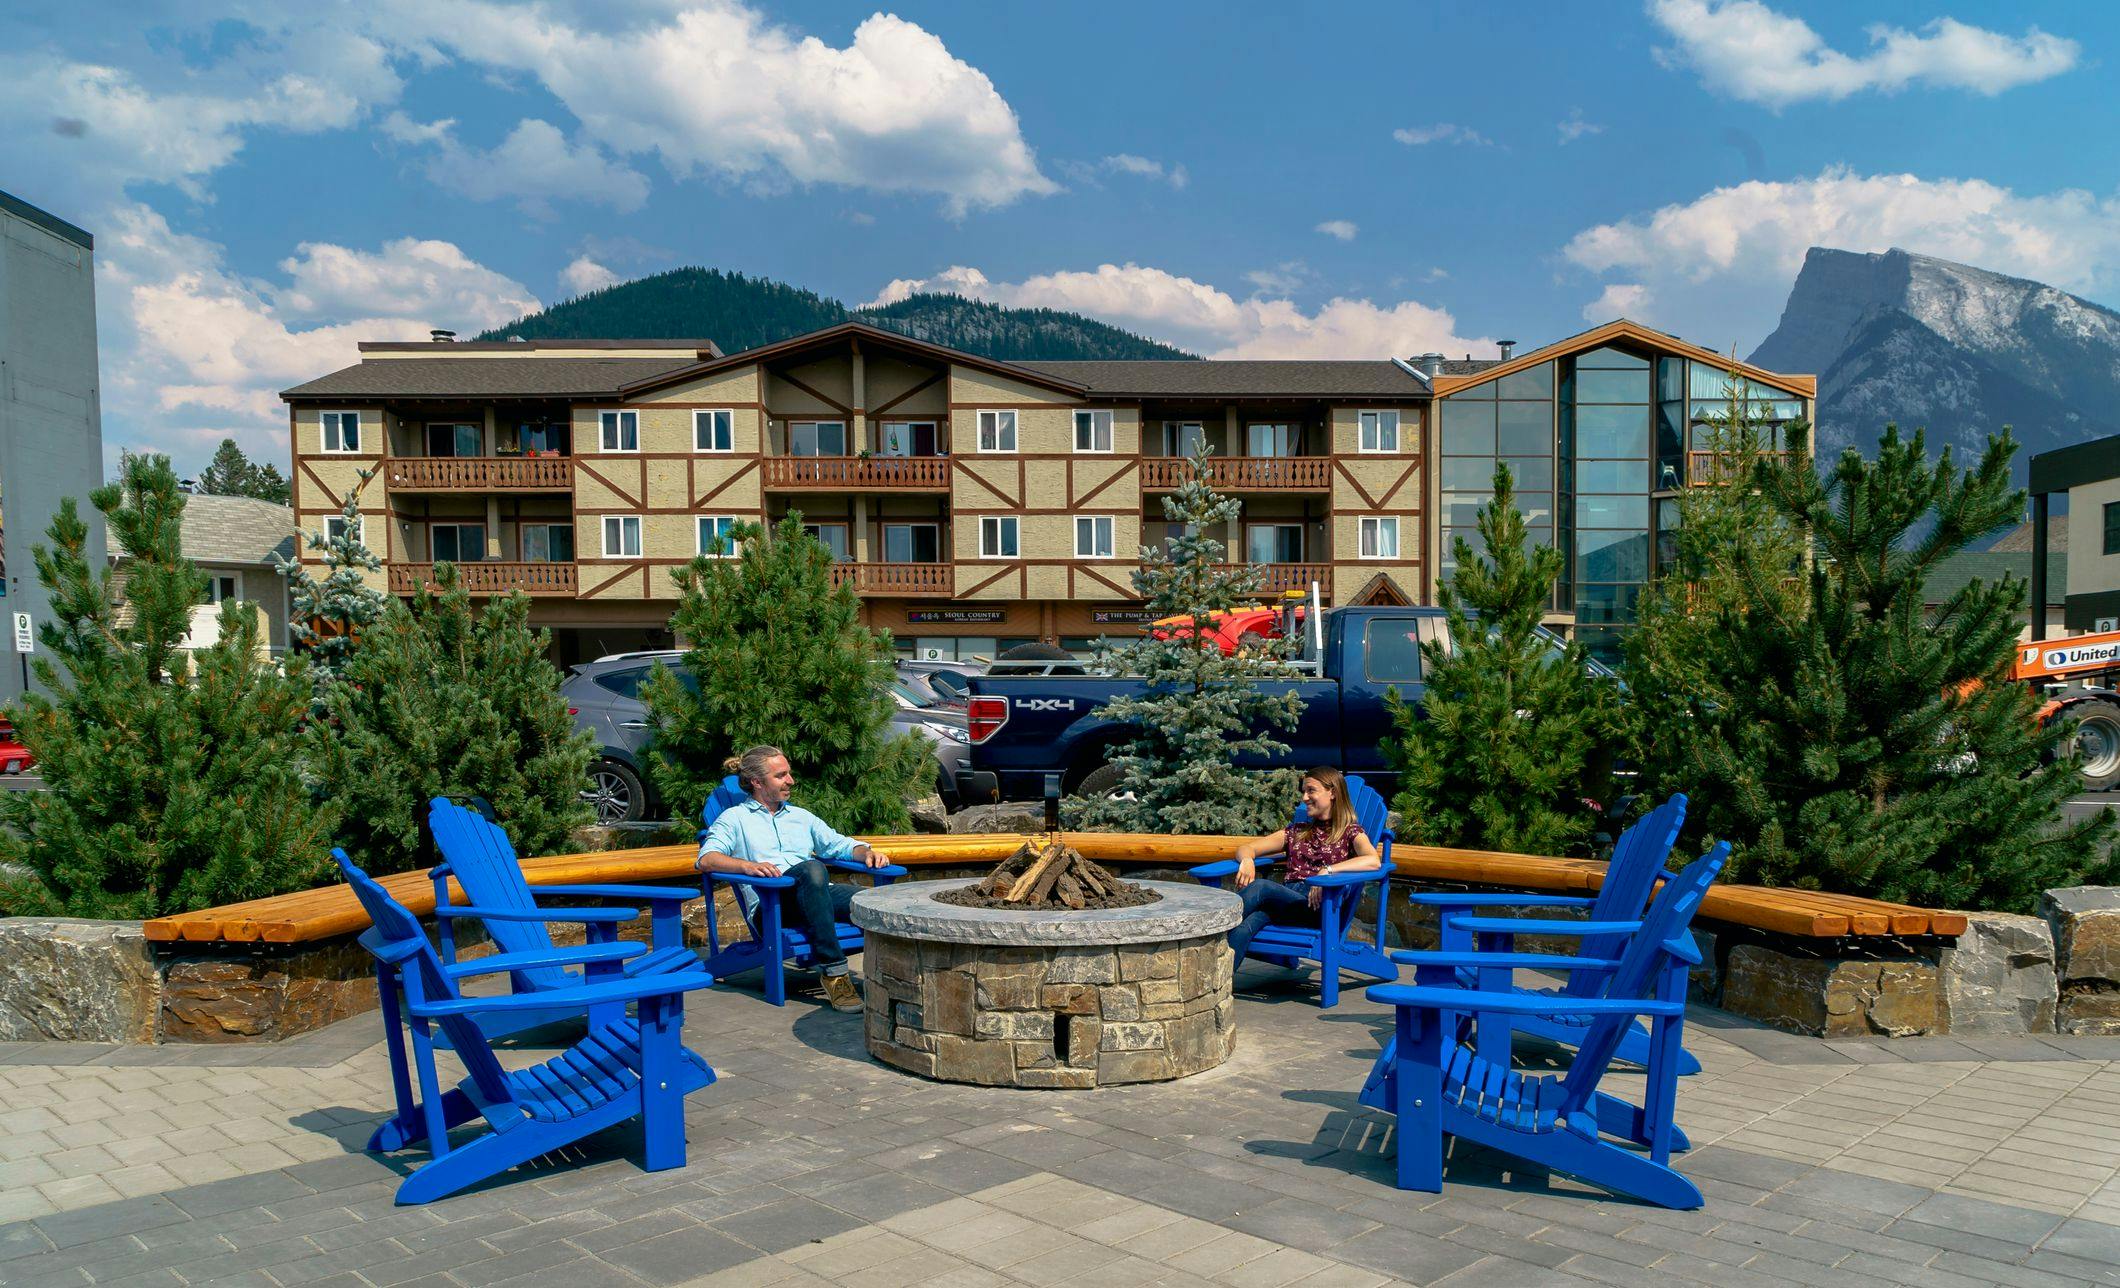 Blue chairs around a gas firepit on the new Bear Street in Banff, Alberta.